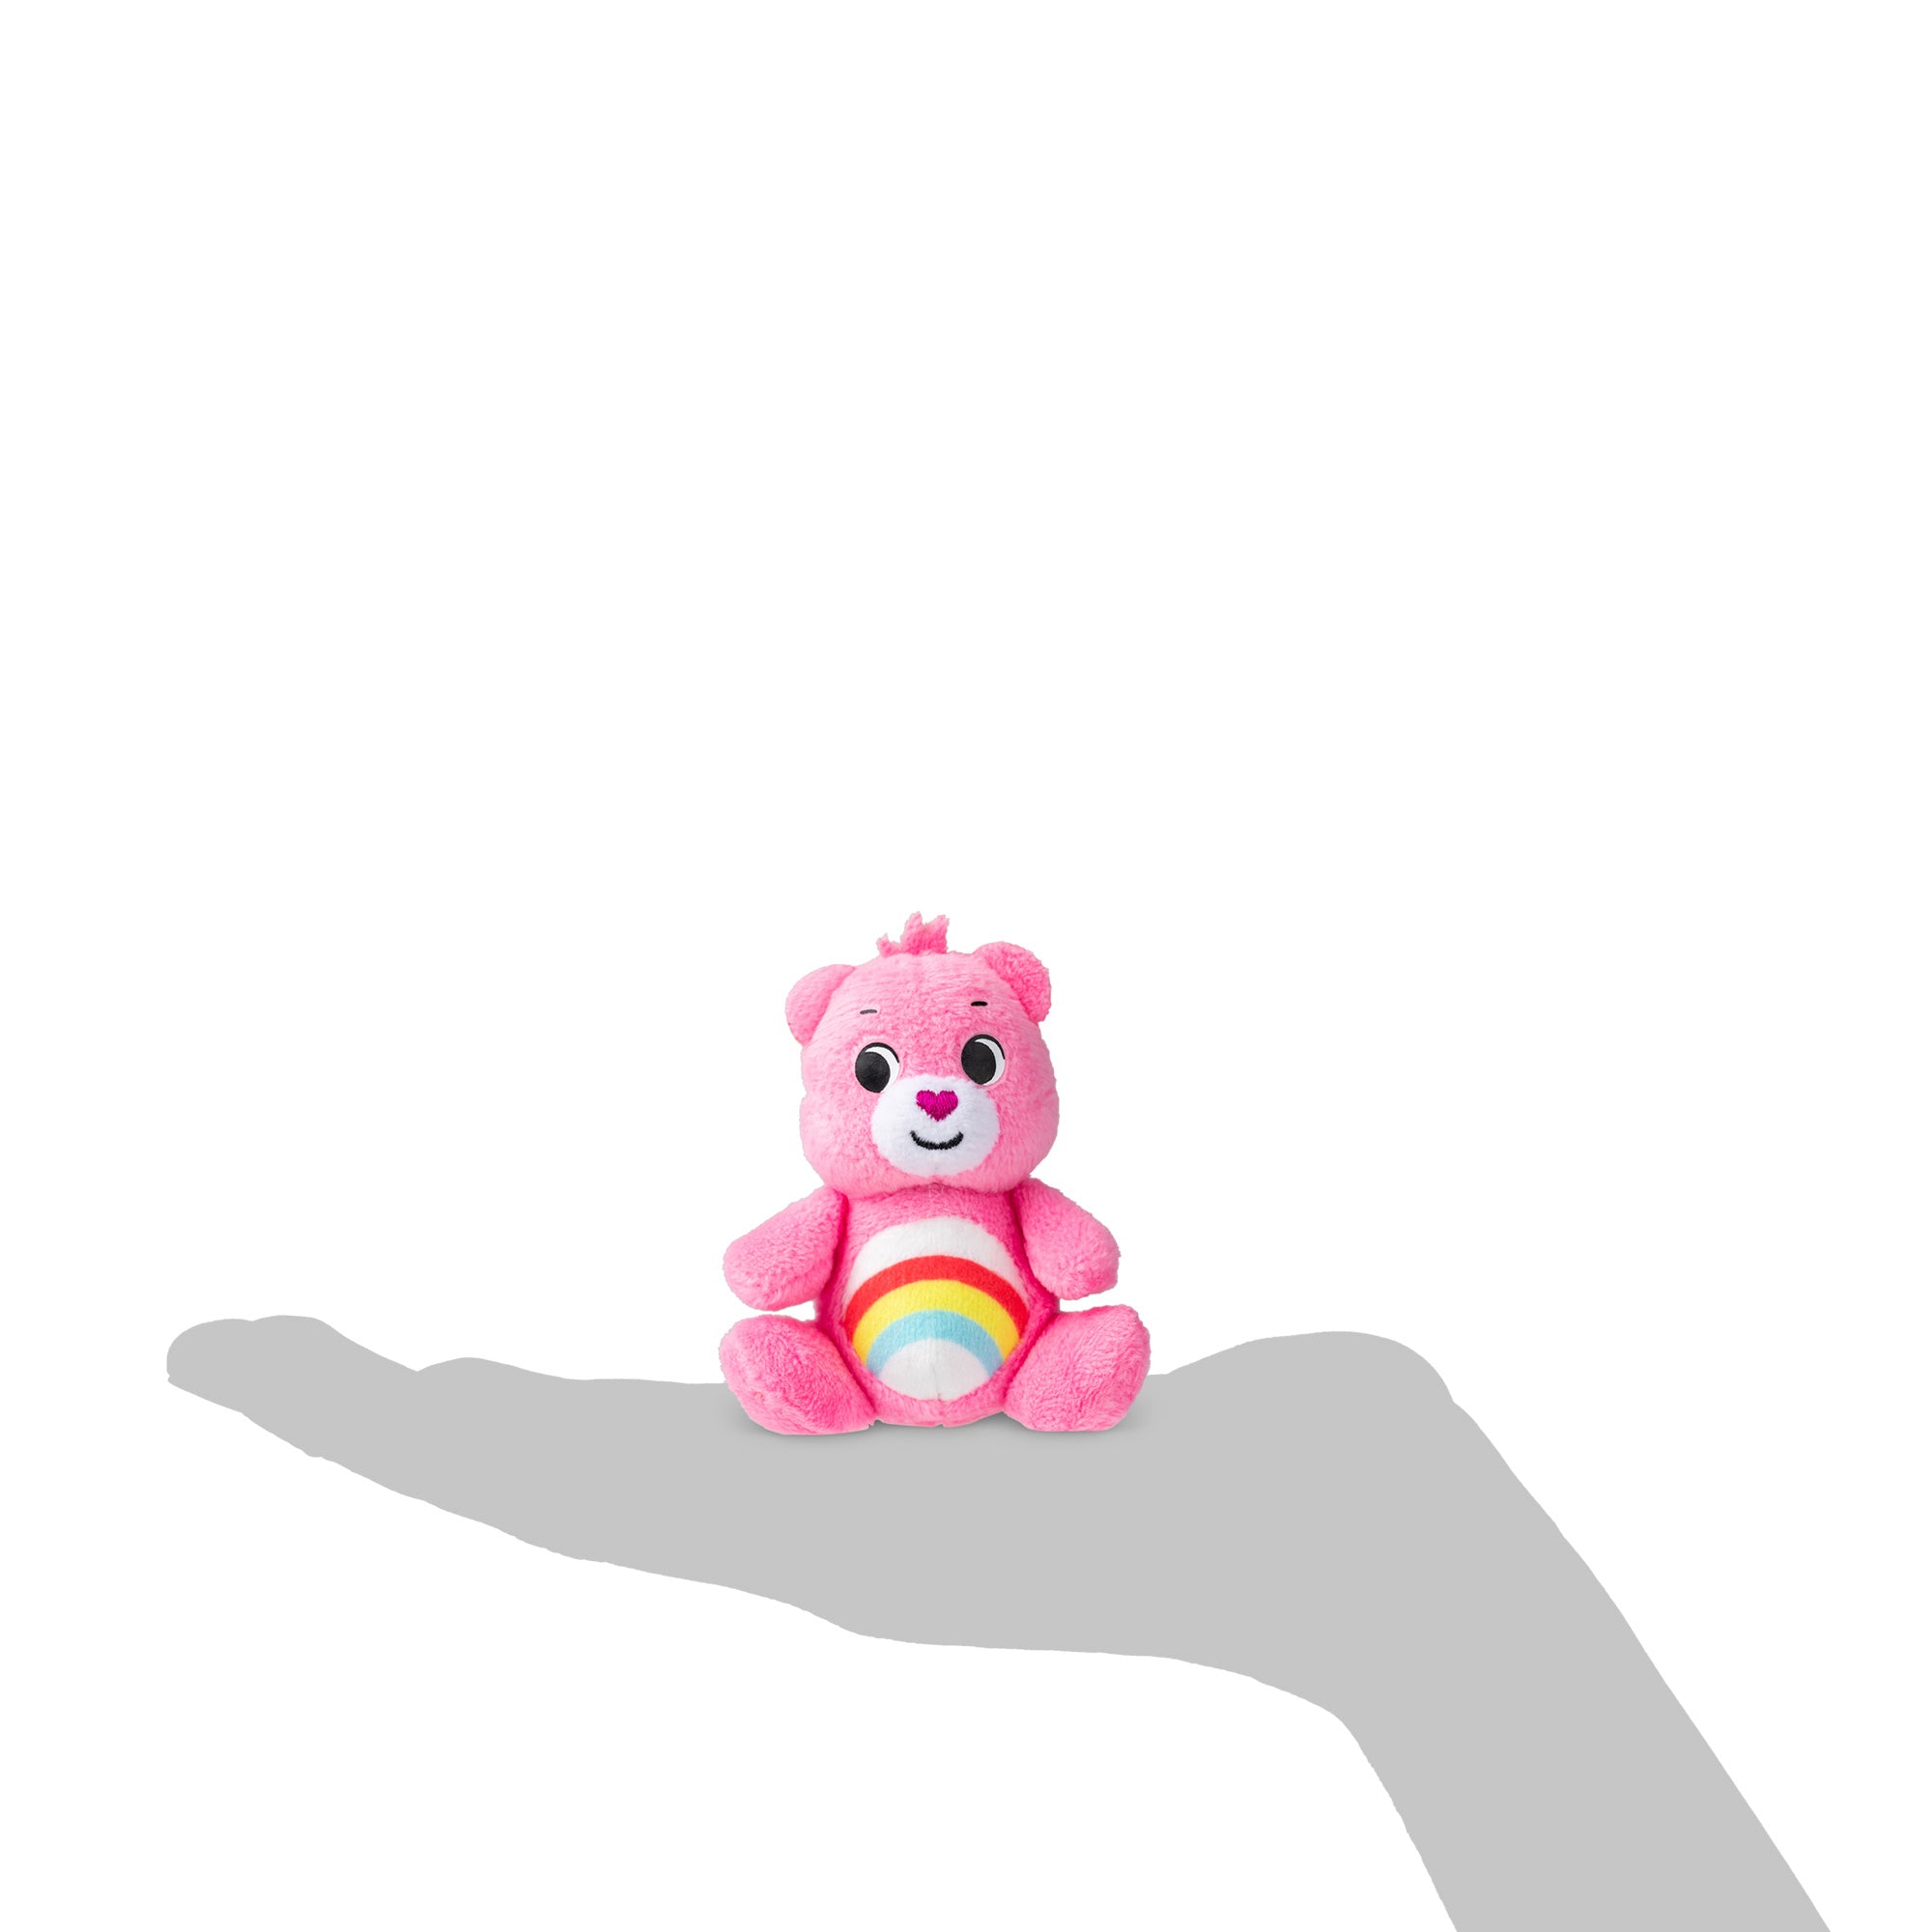 Rainbow bear in the image of a hand to show the small scale.